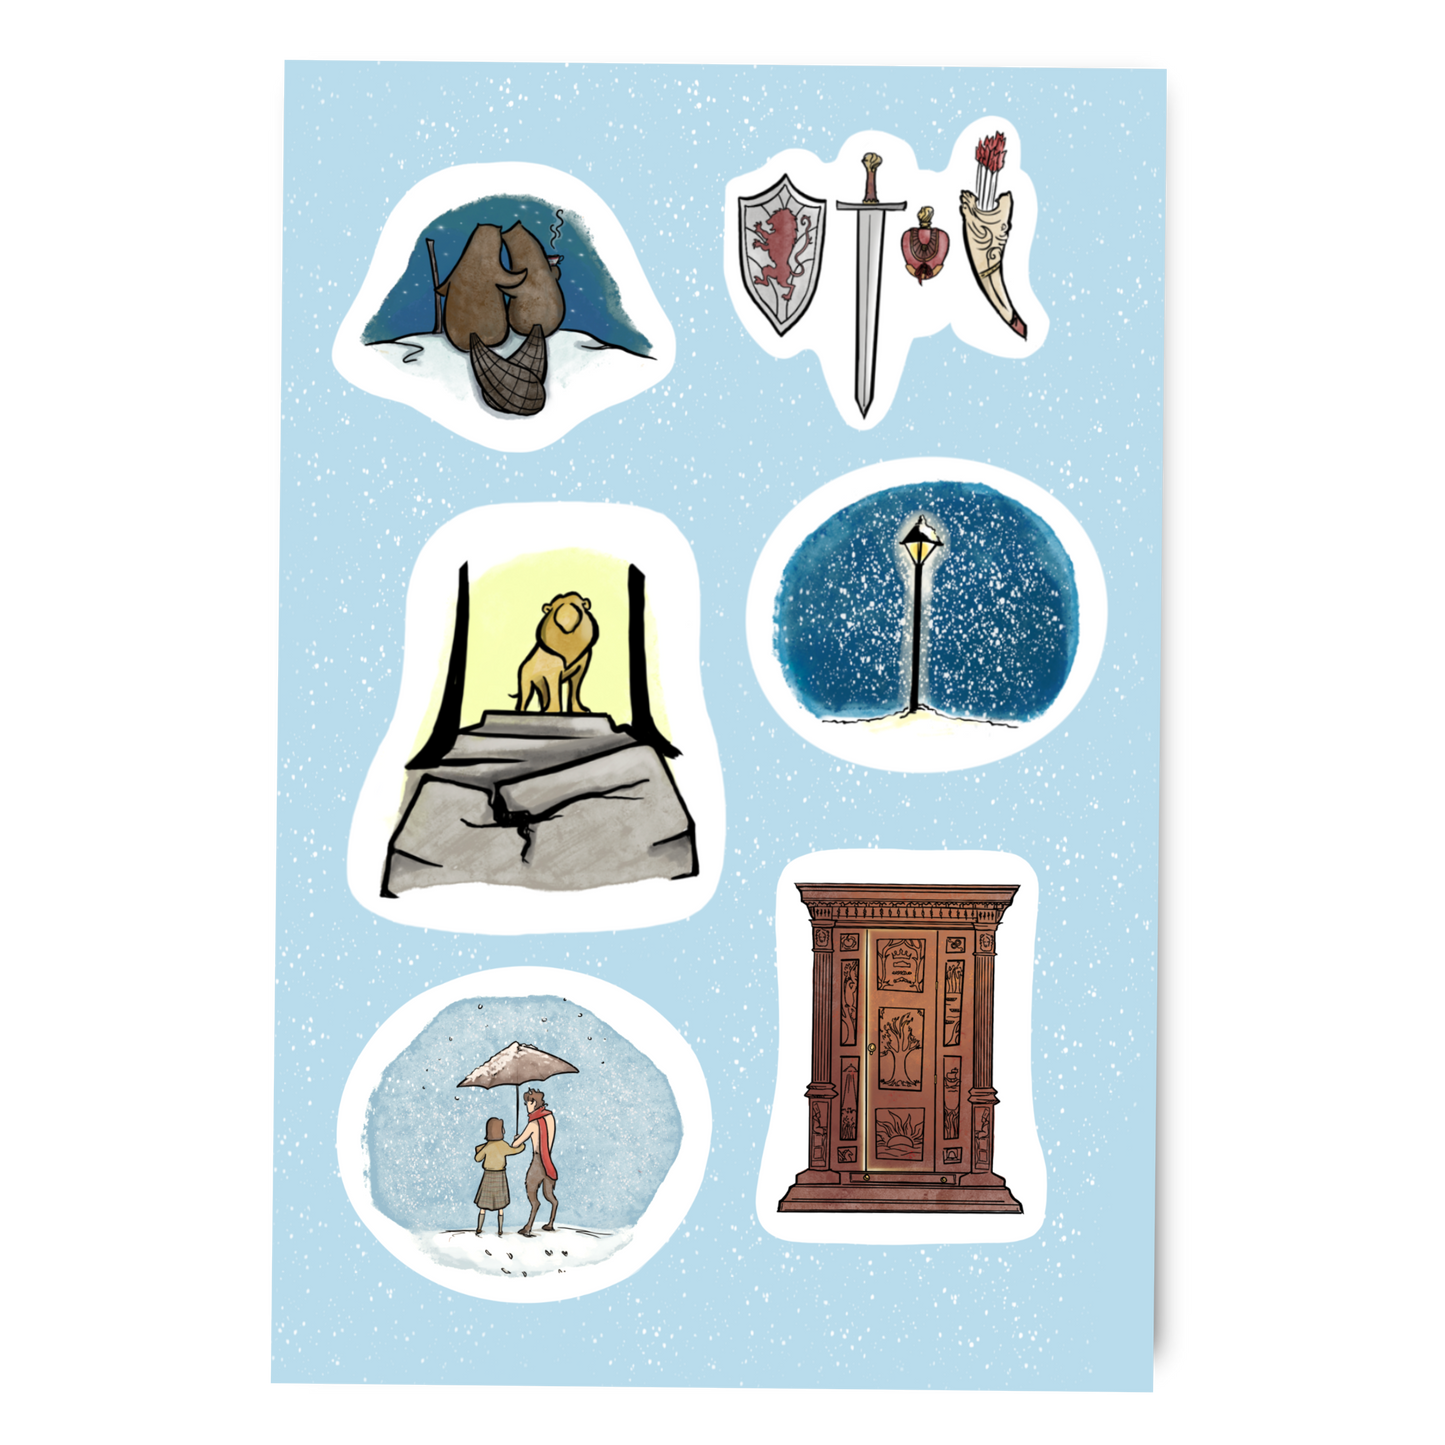 Narnia - Lion Witch and the Wardrobe Sticker Sheet